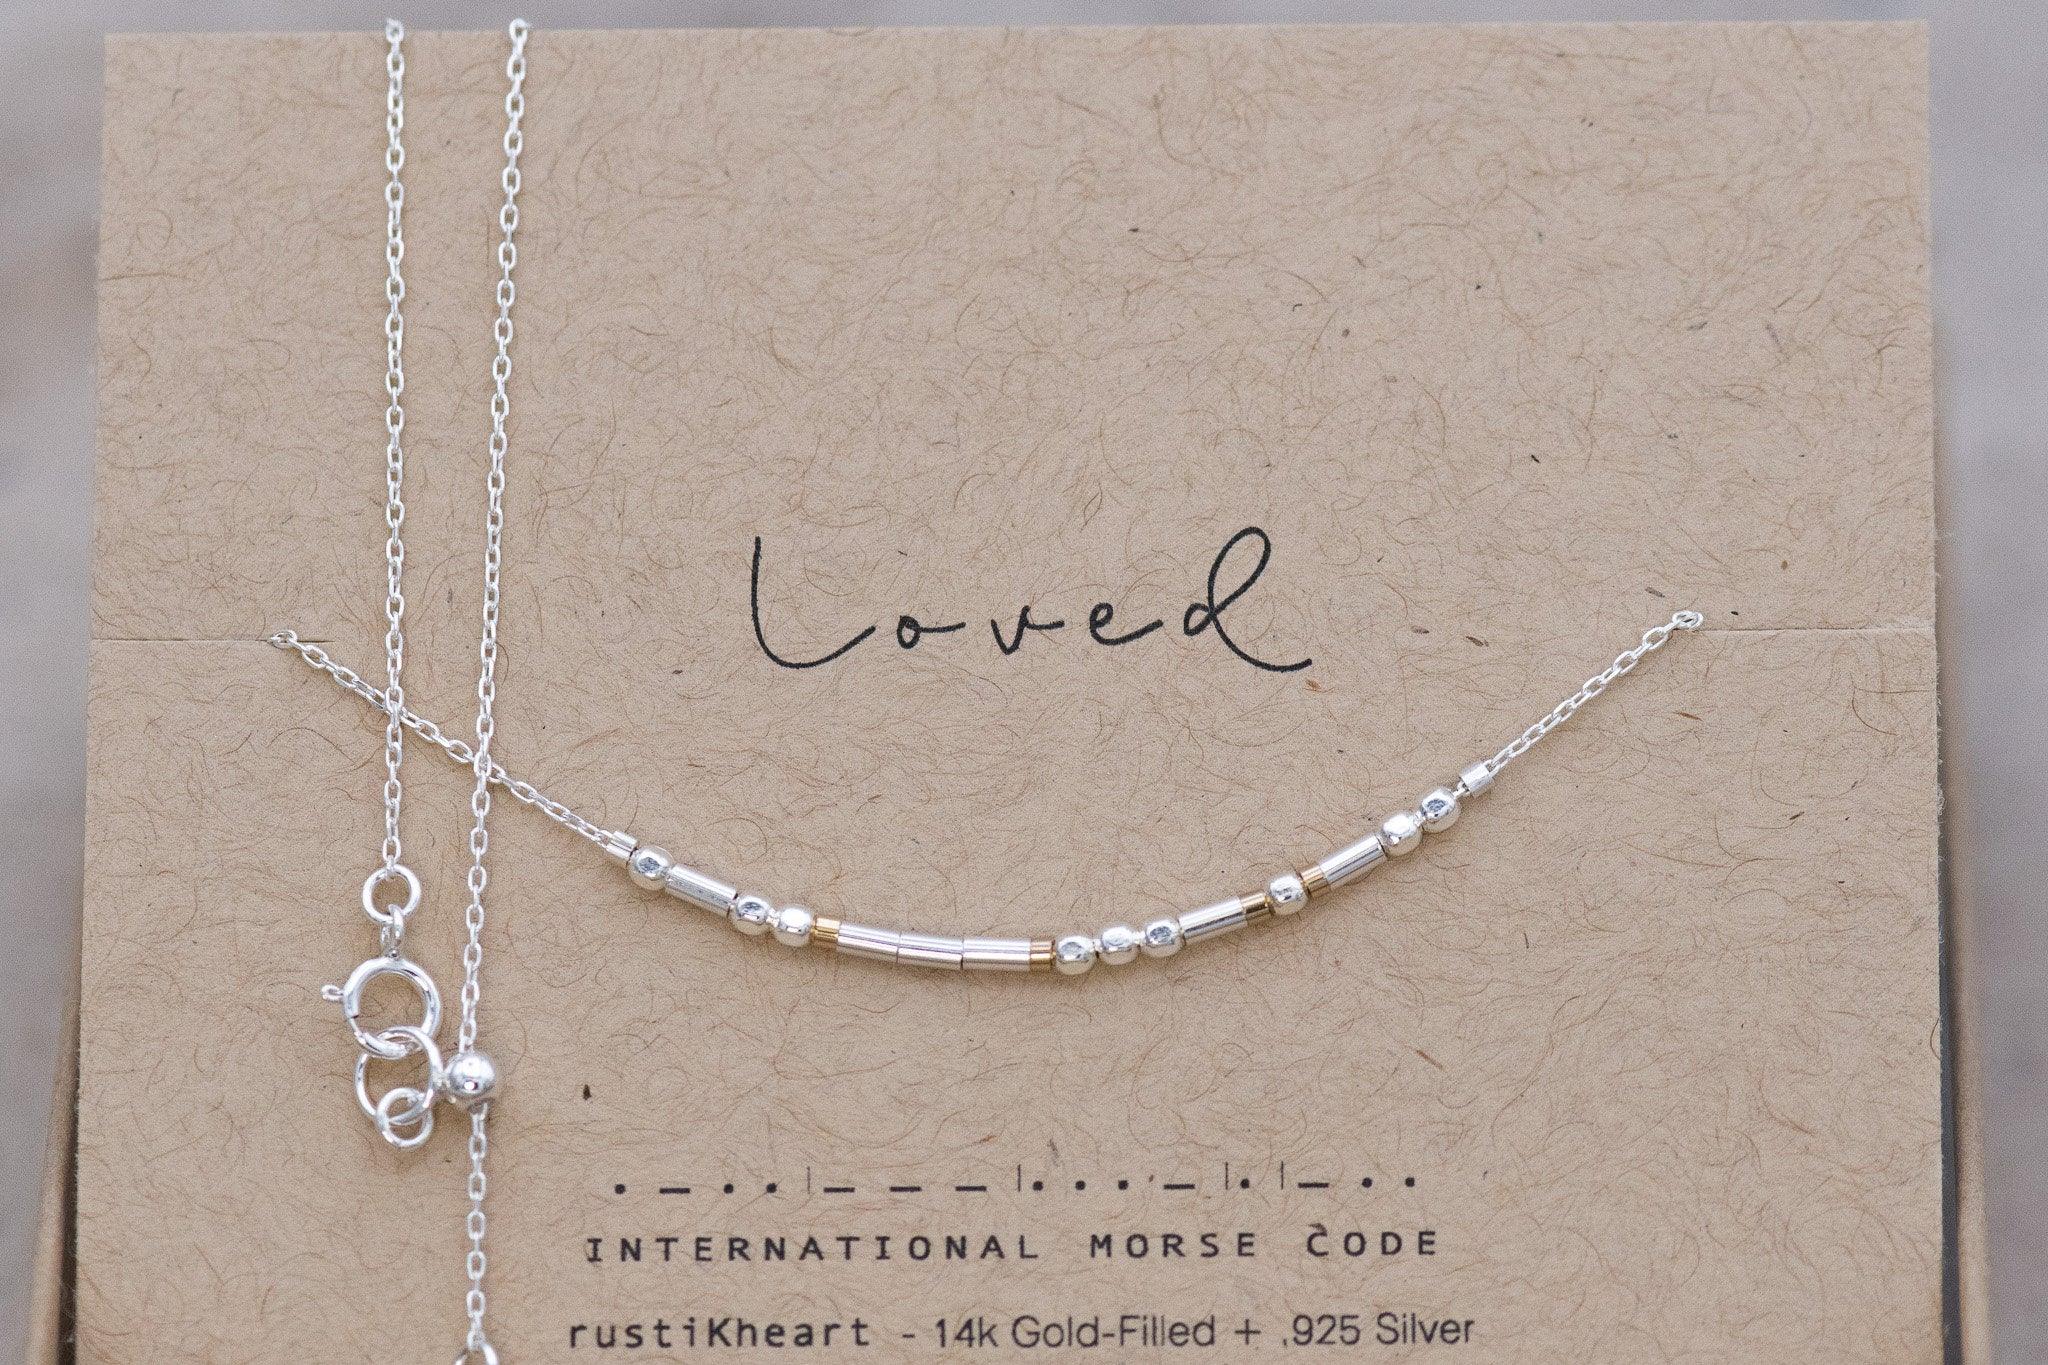 Custom Morse Code Silver Necklace - Personalized Gift Morse Code Jewelry Breathe Necklace Remember to Breathe Yoga Relax Yogi Gift - Morse and Dainty